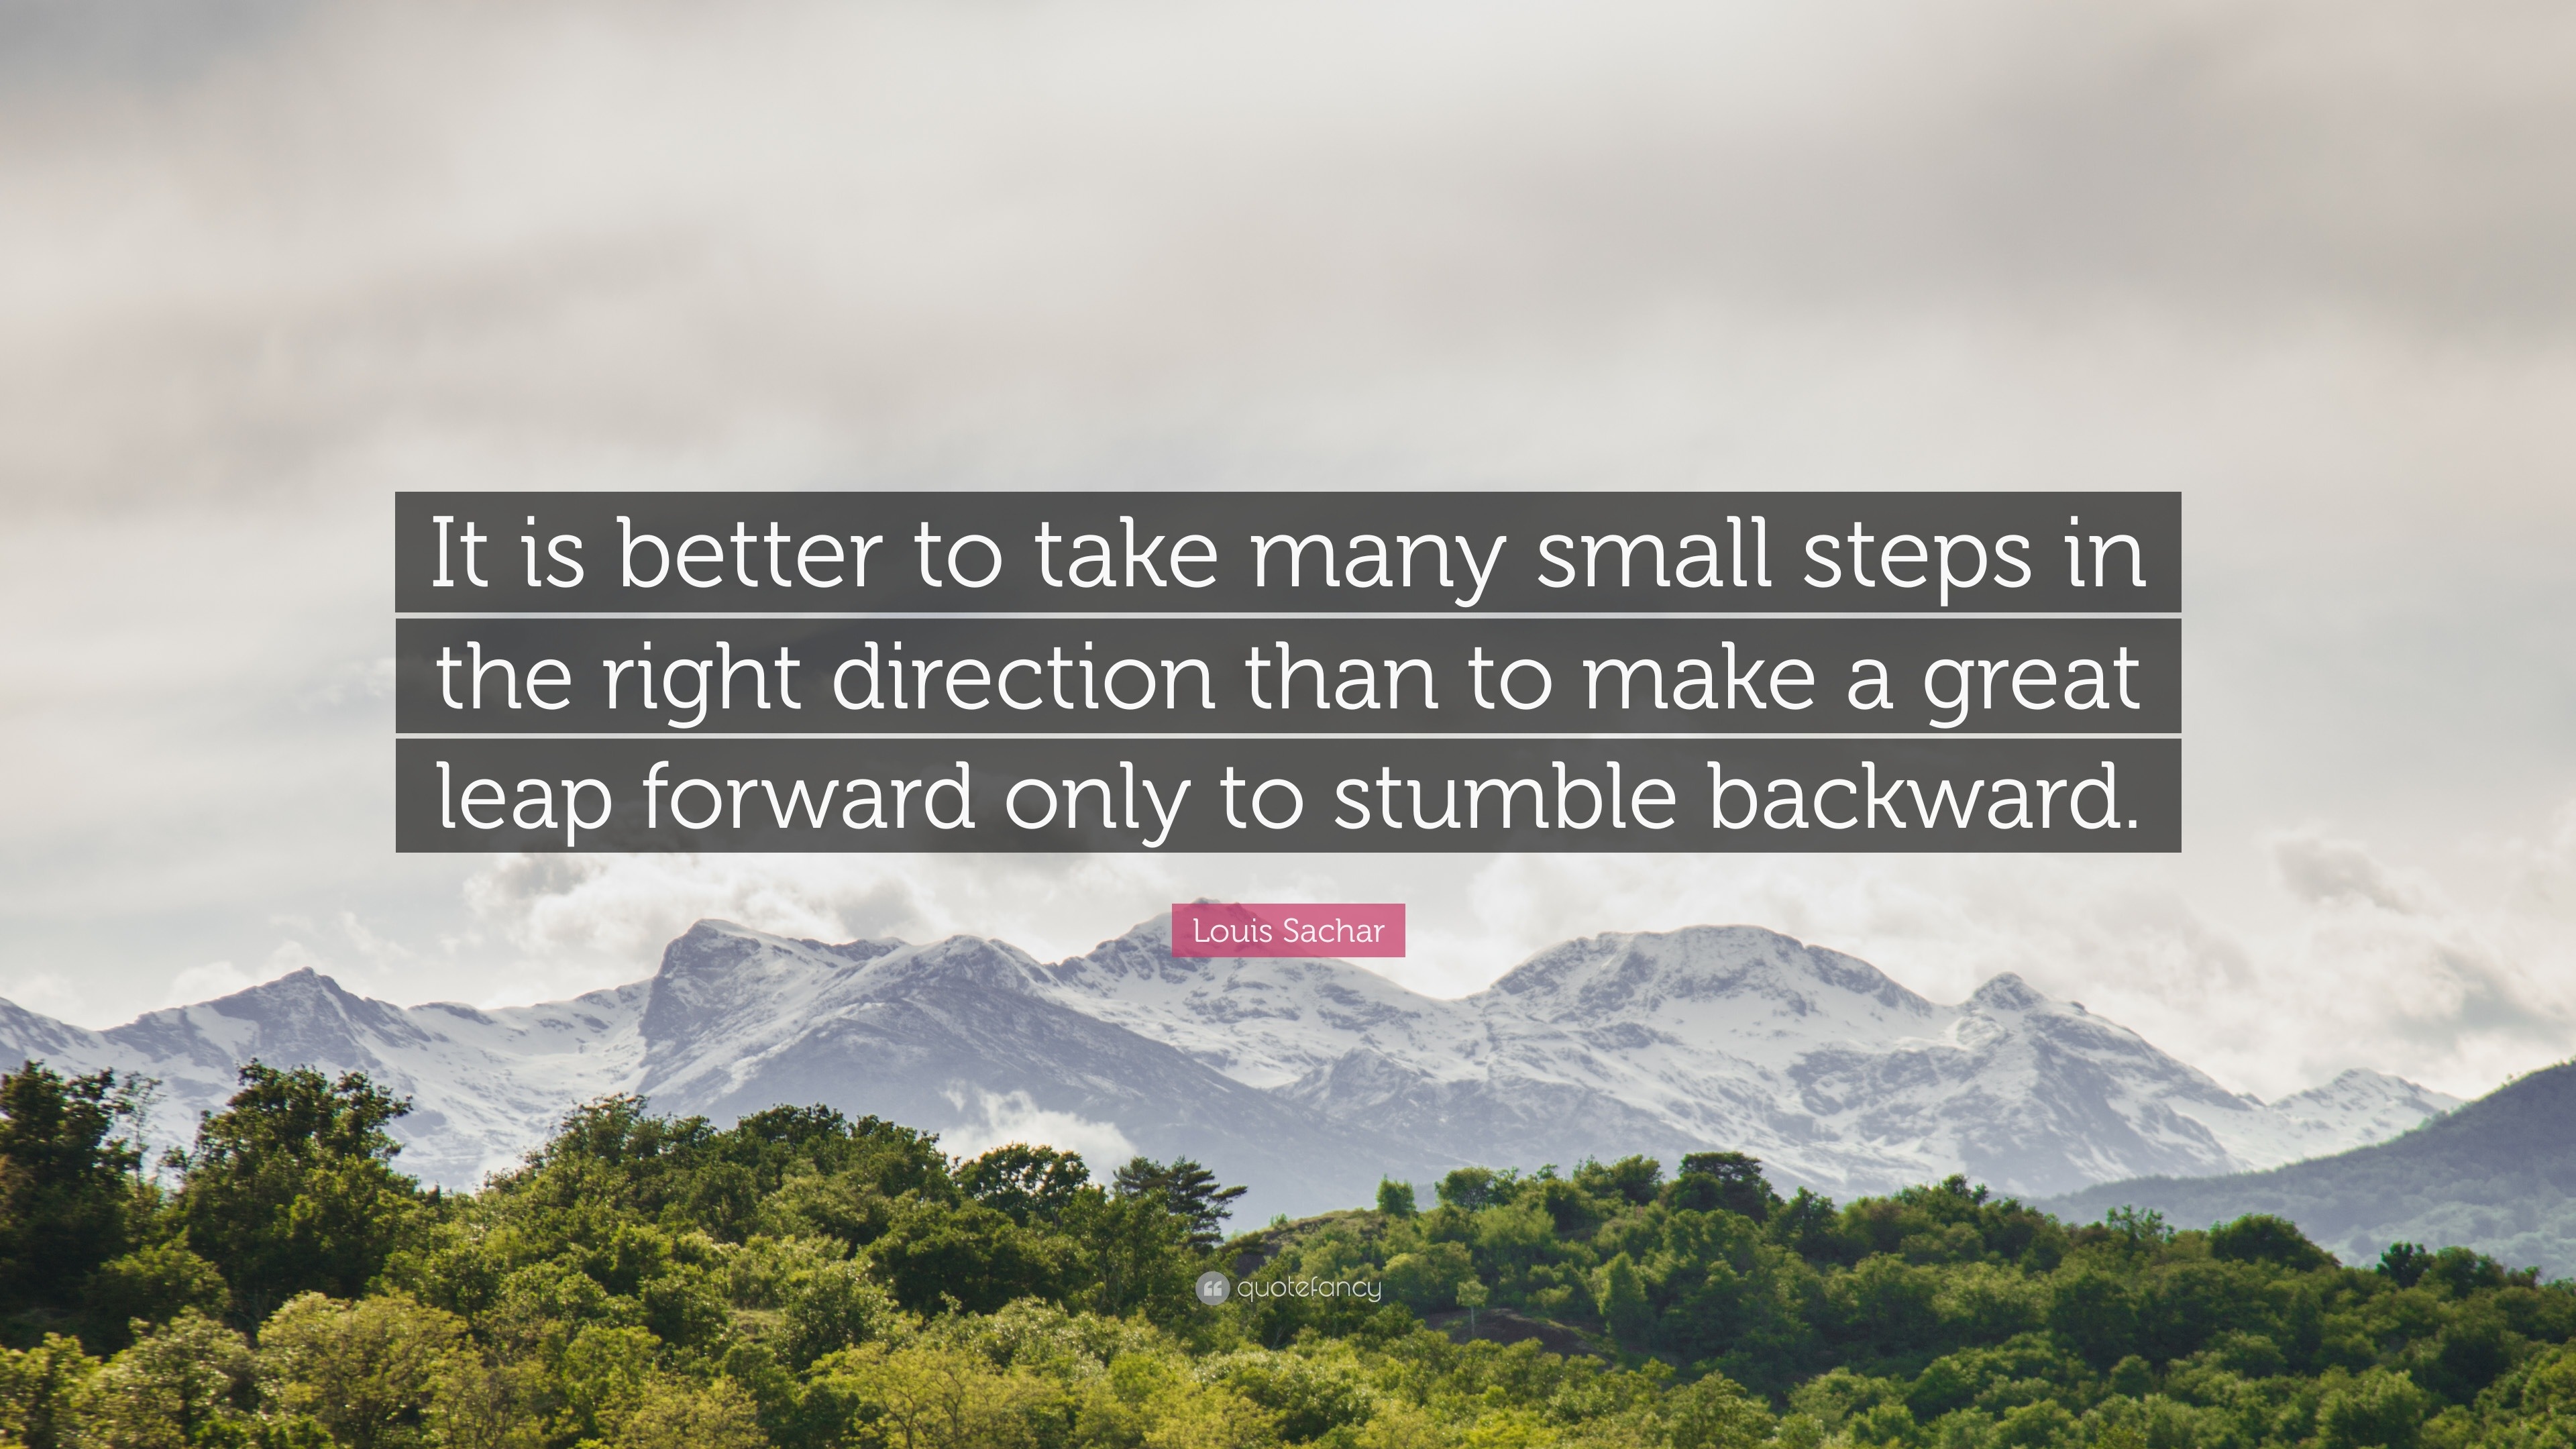 Louis Sachar Quote: “It is better to take many small steps in the right  direction than